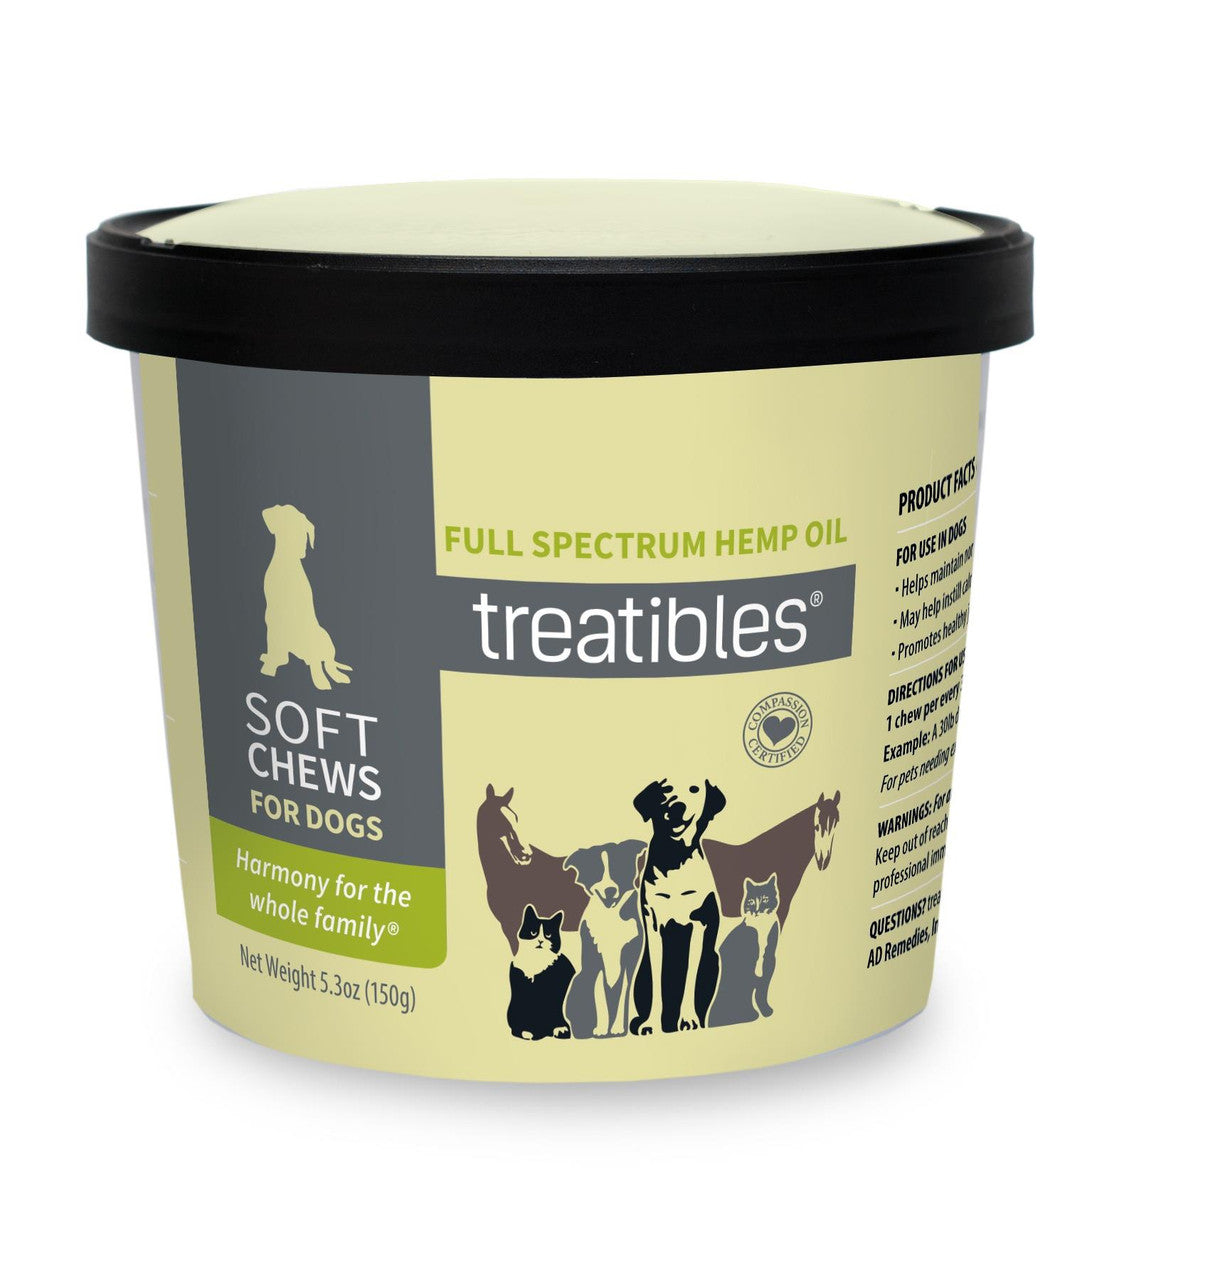 Treatibles Soft Chews for Dogs 60 count {L-1}591021 858085008165